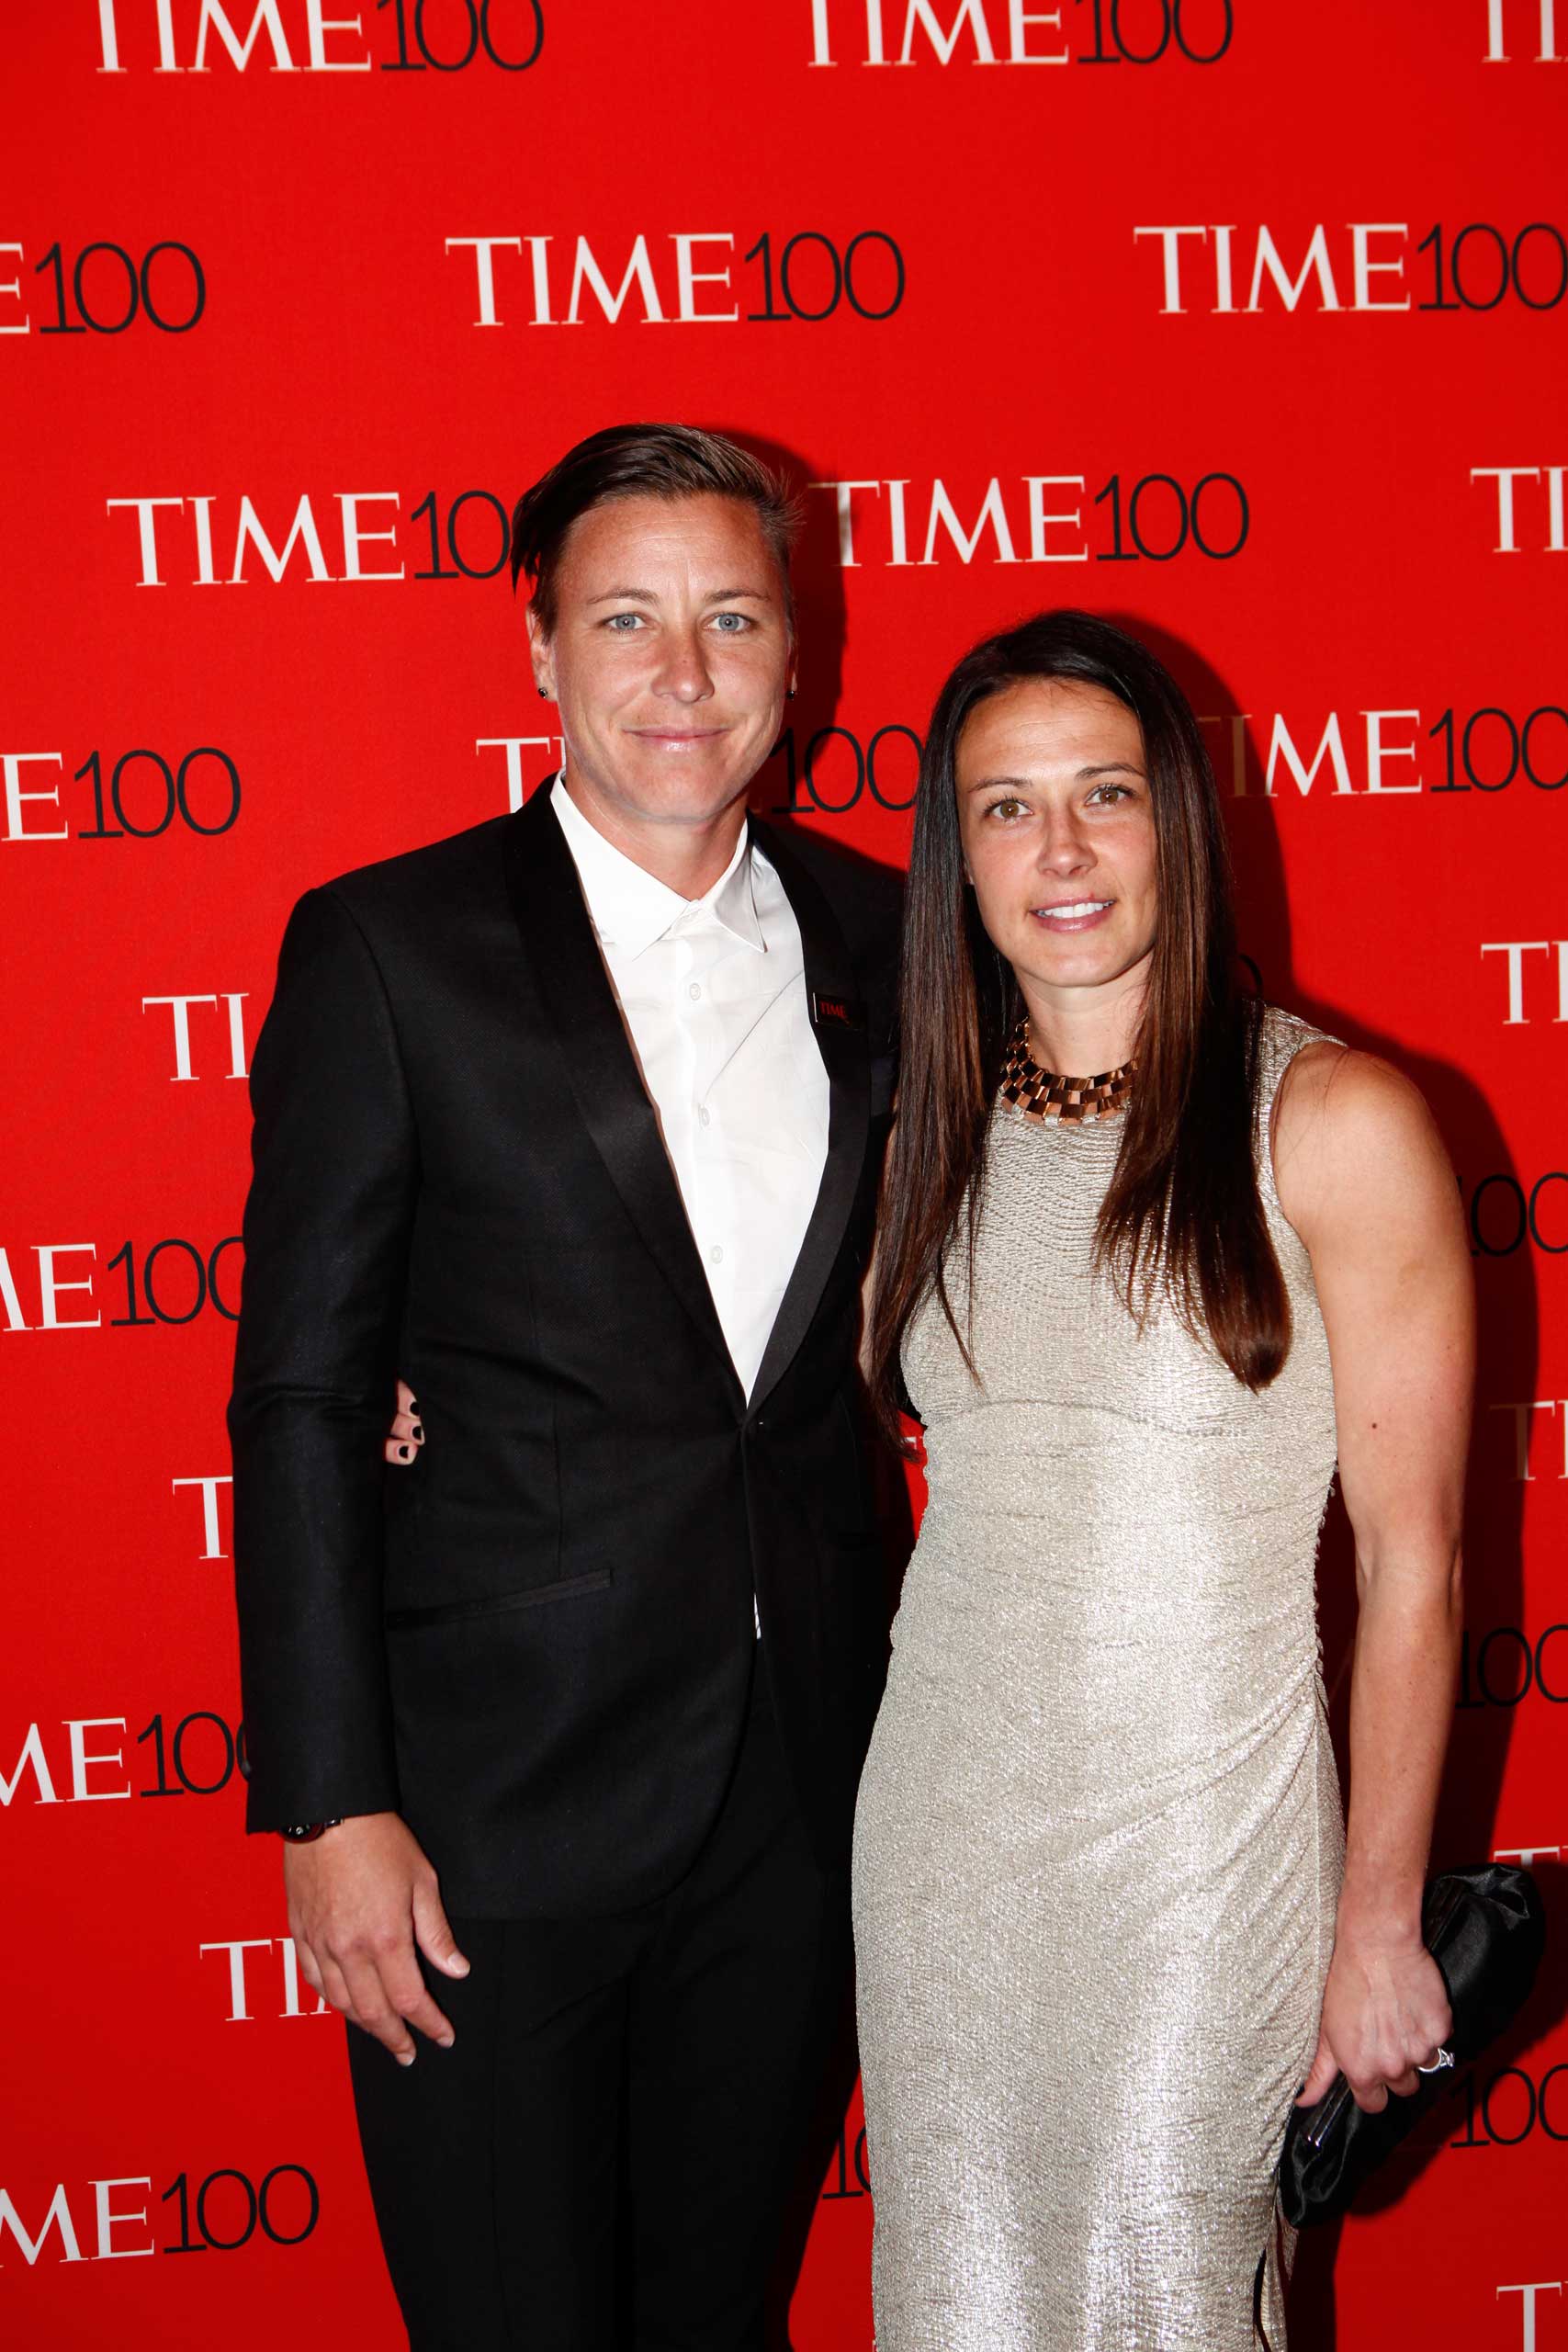 Abby Wambach and Sarah Huffman attend the TIME 100 Gala at Lincoln Center in New York City on Apr. 21, 2015.